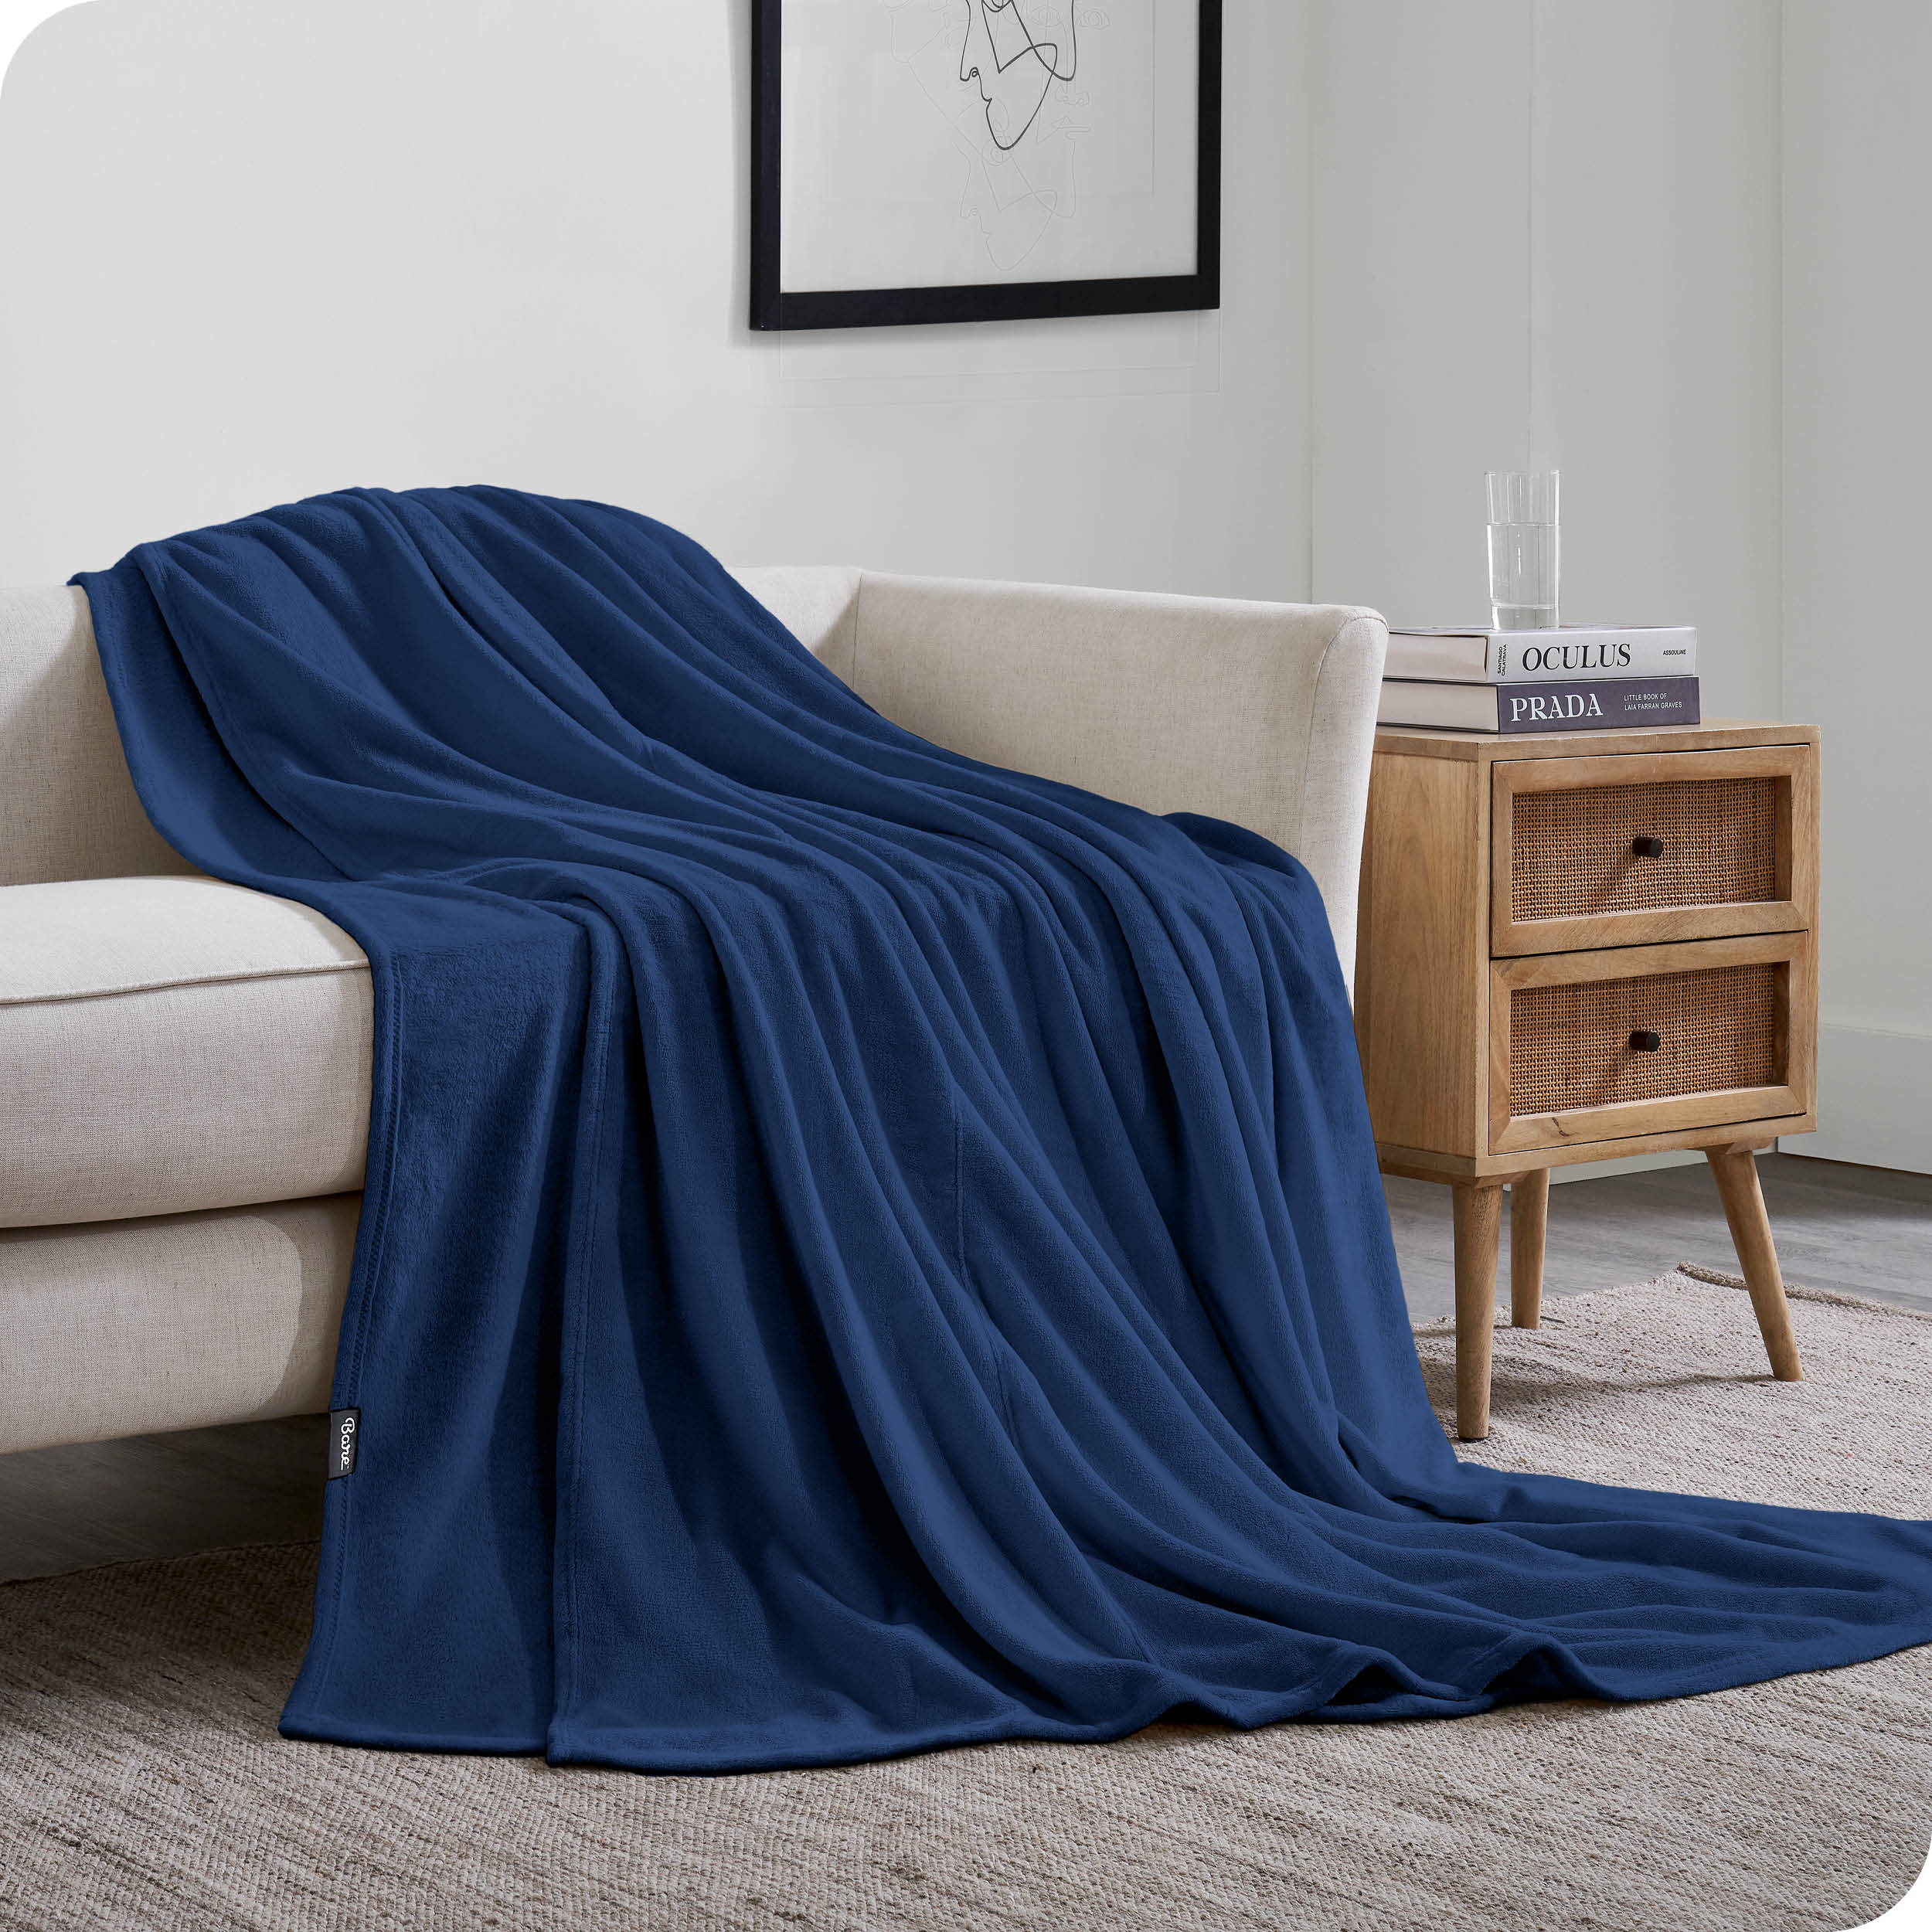 A giant blanket draped over a couch and on the floor